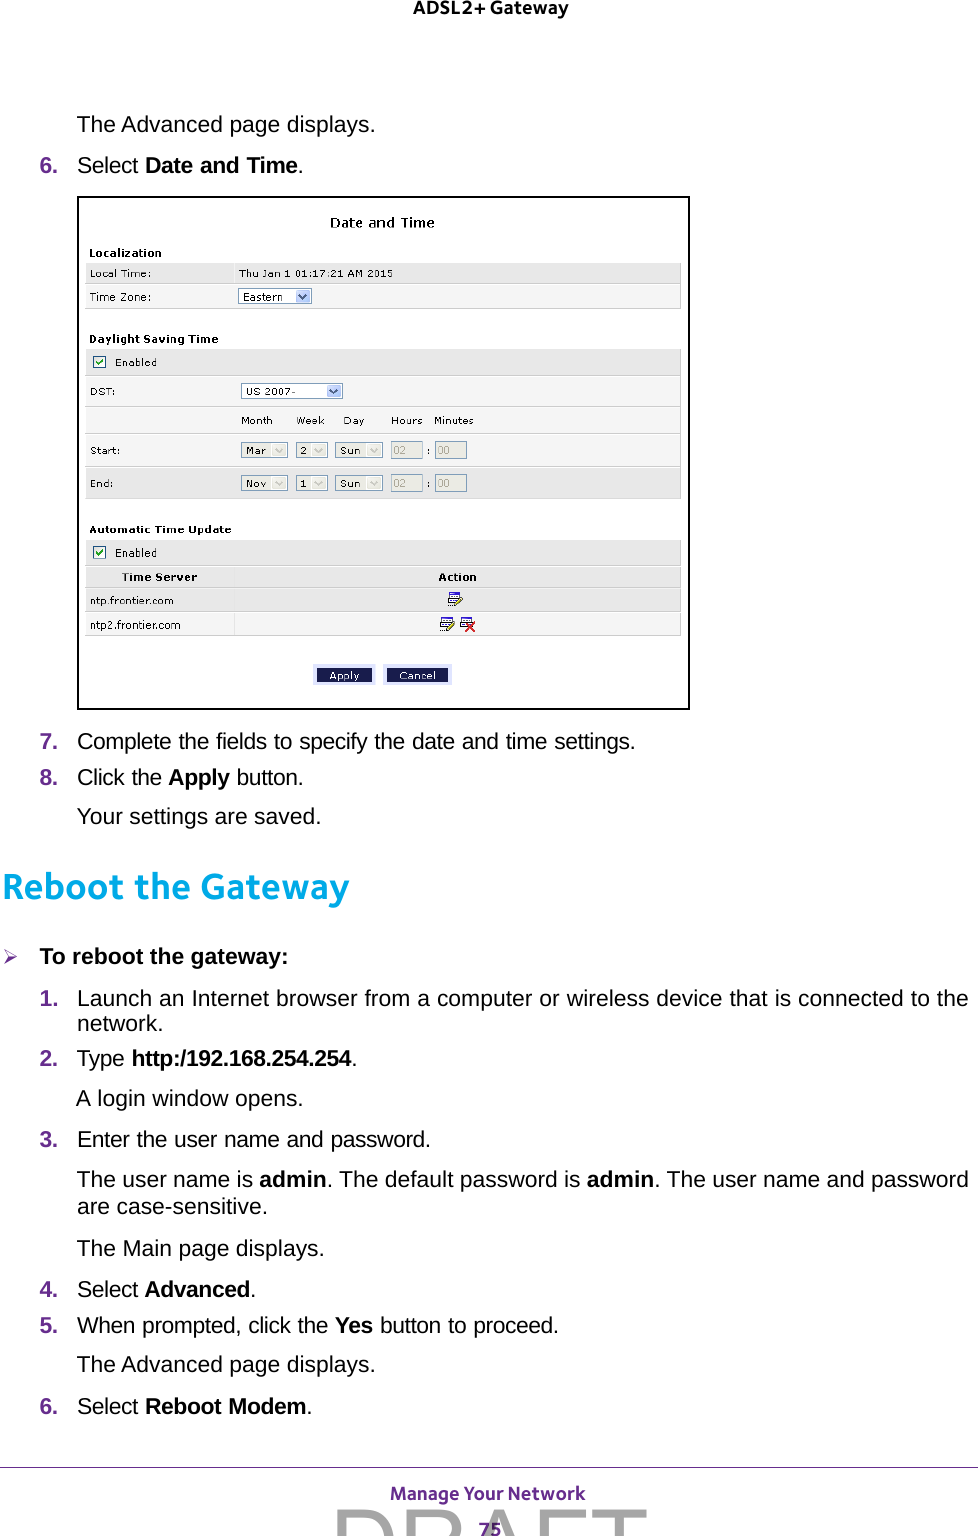 Manage Your Network 75 ADSL2+ GatewayThe Advanced page displays.6.  Select Date and Time. 7.  Complete the fields to specify the date and time settings.8.  Click the Apply button.Your settings are saved.Reboot the GatewayTo reboot the gateway:1.  Launch an Internet browser from a computer or wireless device that is connected to the network.2.  Type http:/192.168.254.254.A login window opens.3.  Enter the user name and password.The user name is admin. The default password is admin. The user name and password are case-sensitive.The Main page displays.4.  Select Advanced.5.  When prompted, click the Yes button to proceed.The Advanced page displays.6.  Select Reboot Modem. DRAFT